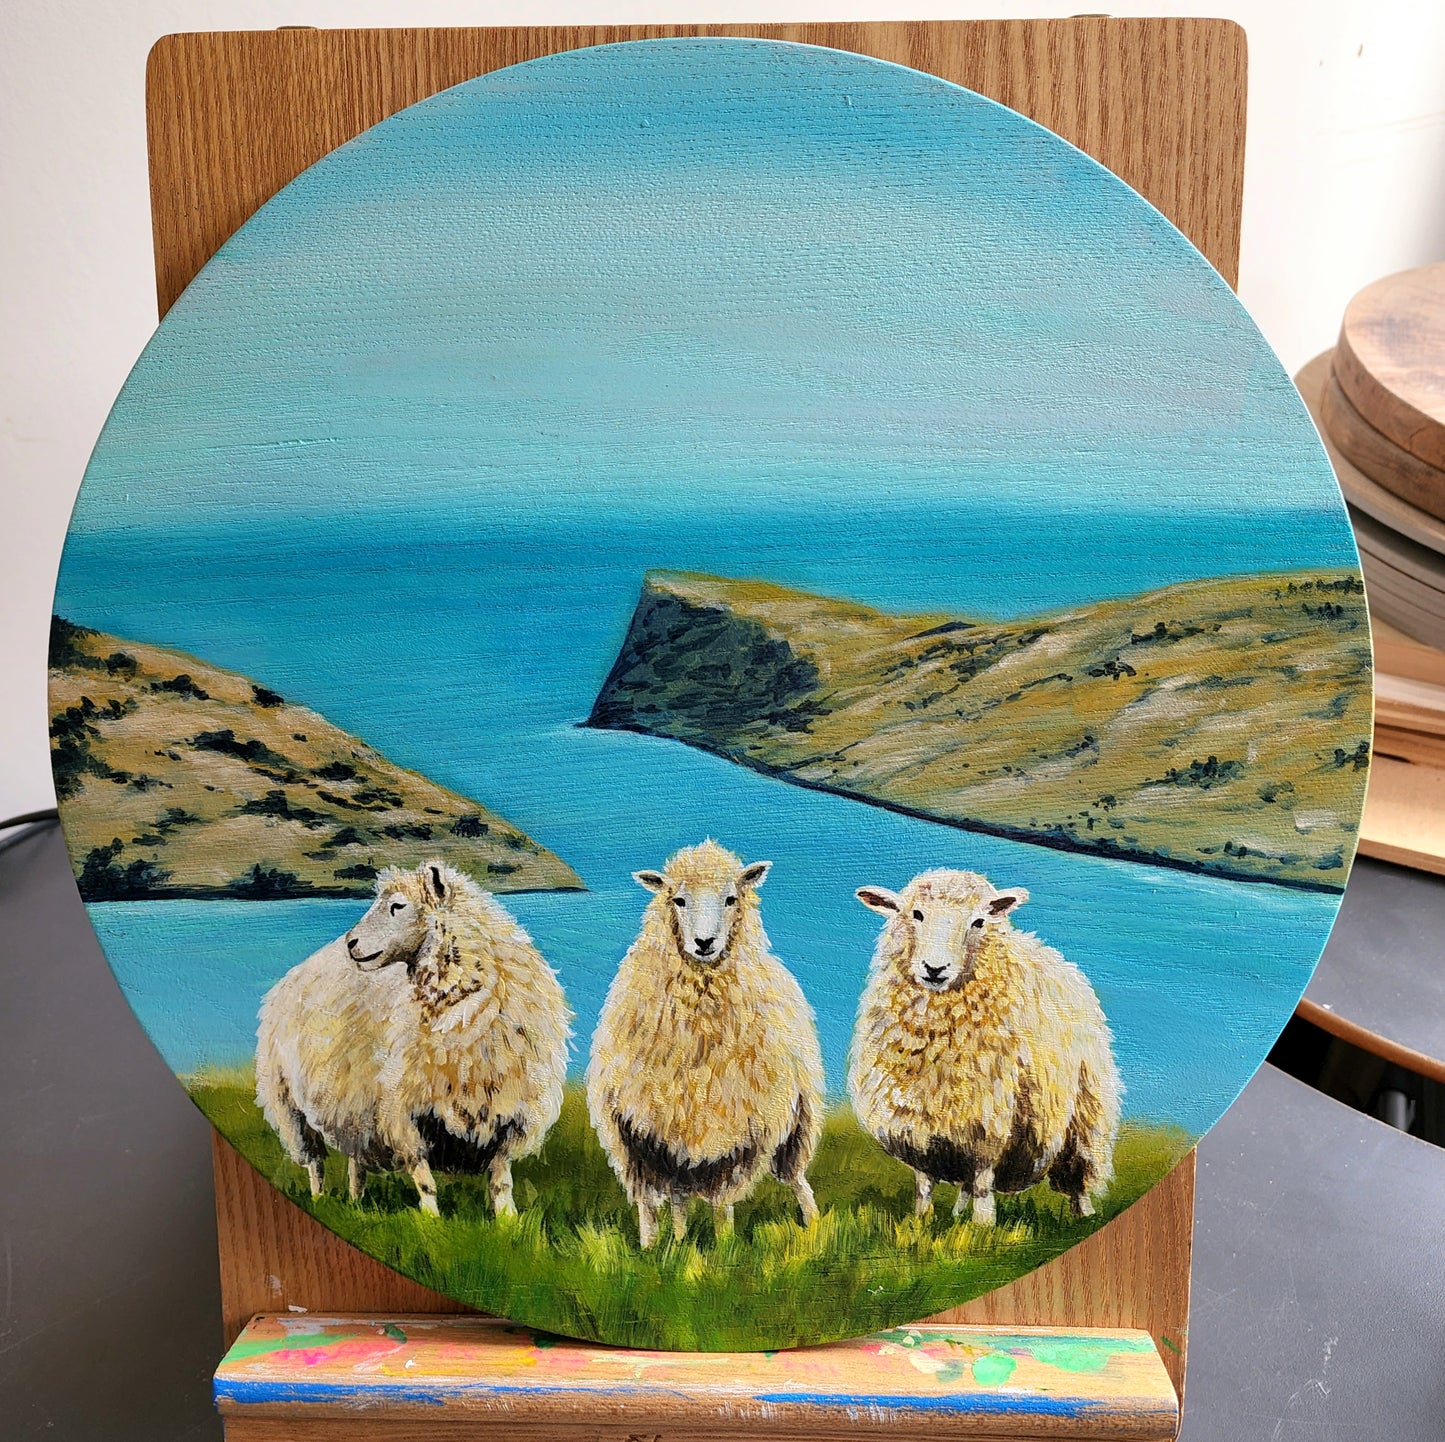 Three Little Sheep - Wooden board painting